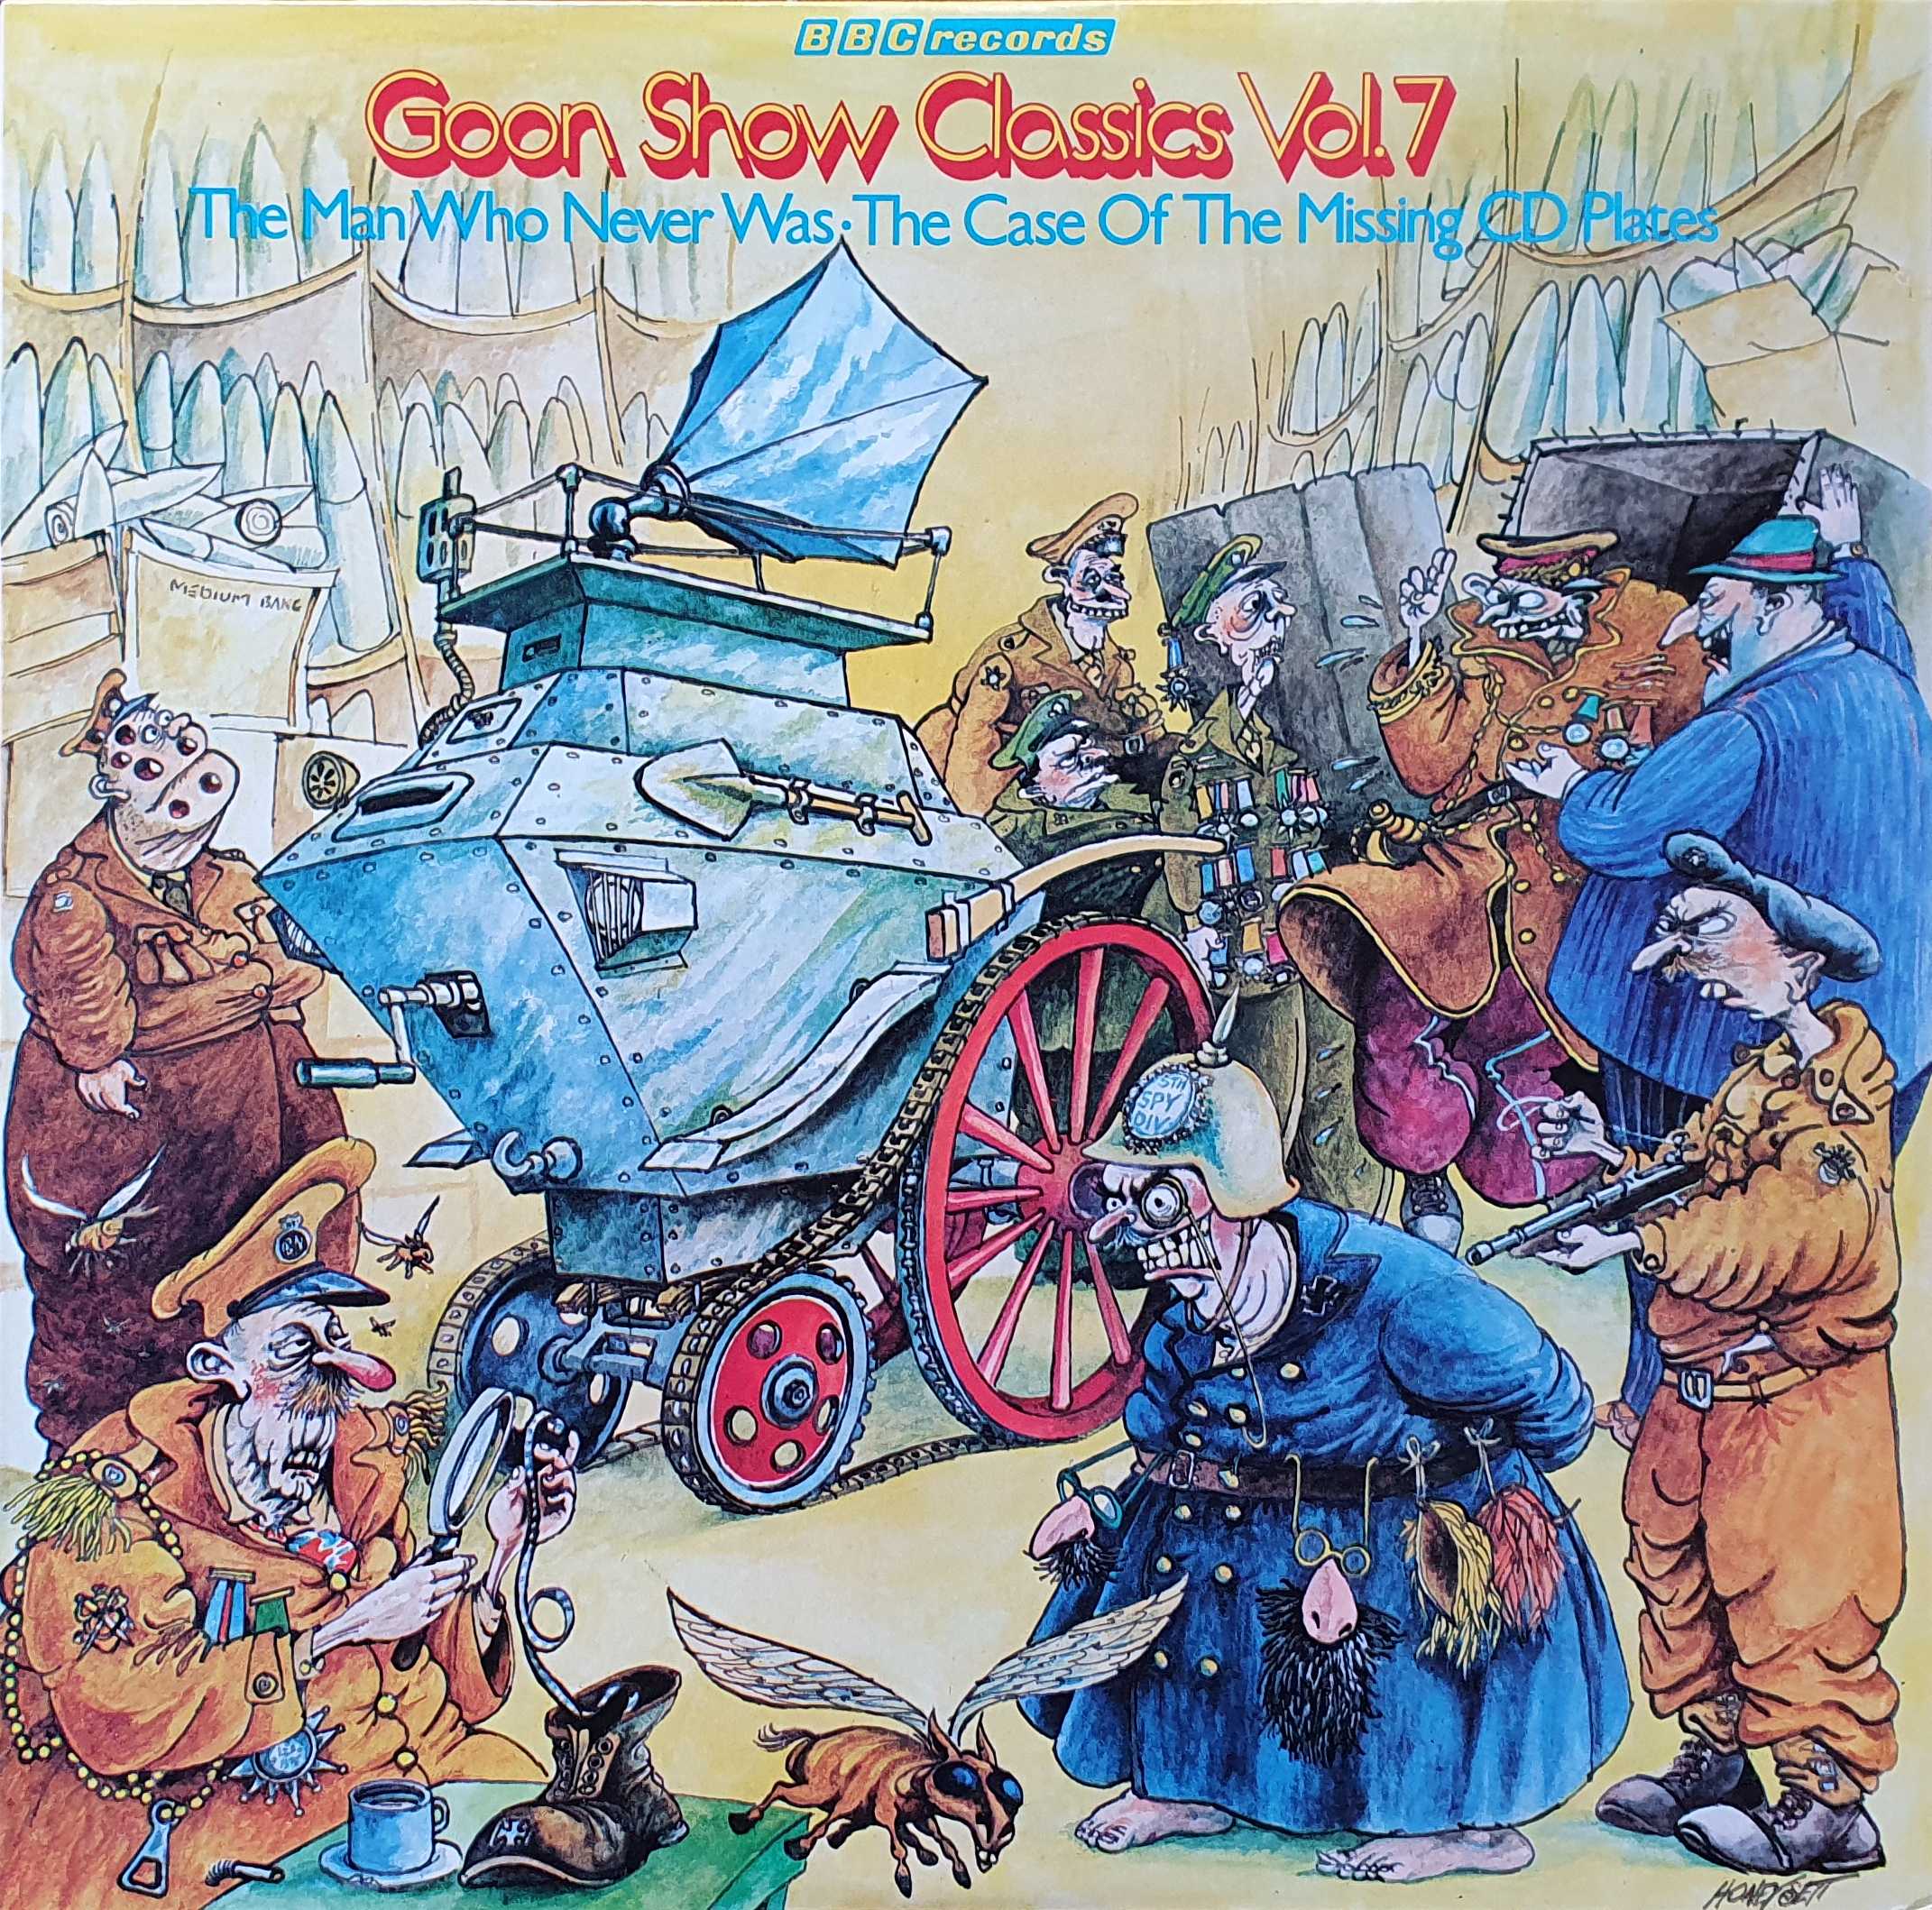 Picture of 2964 058 Goon Show classics Vol. 7 (Australian import) by artist The Goon Show from the BBC albums - Records and Tapes library